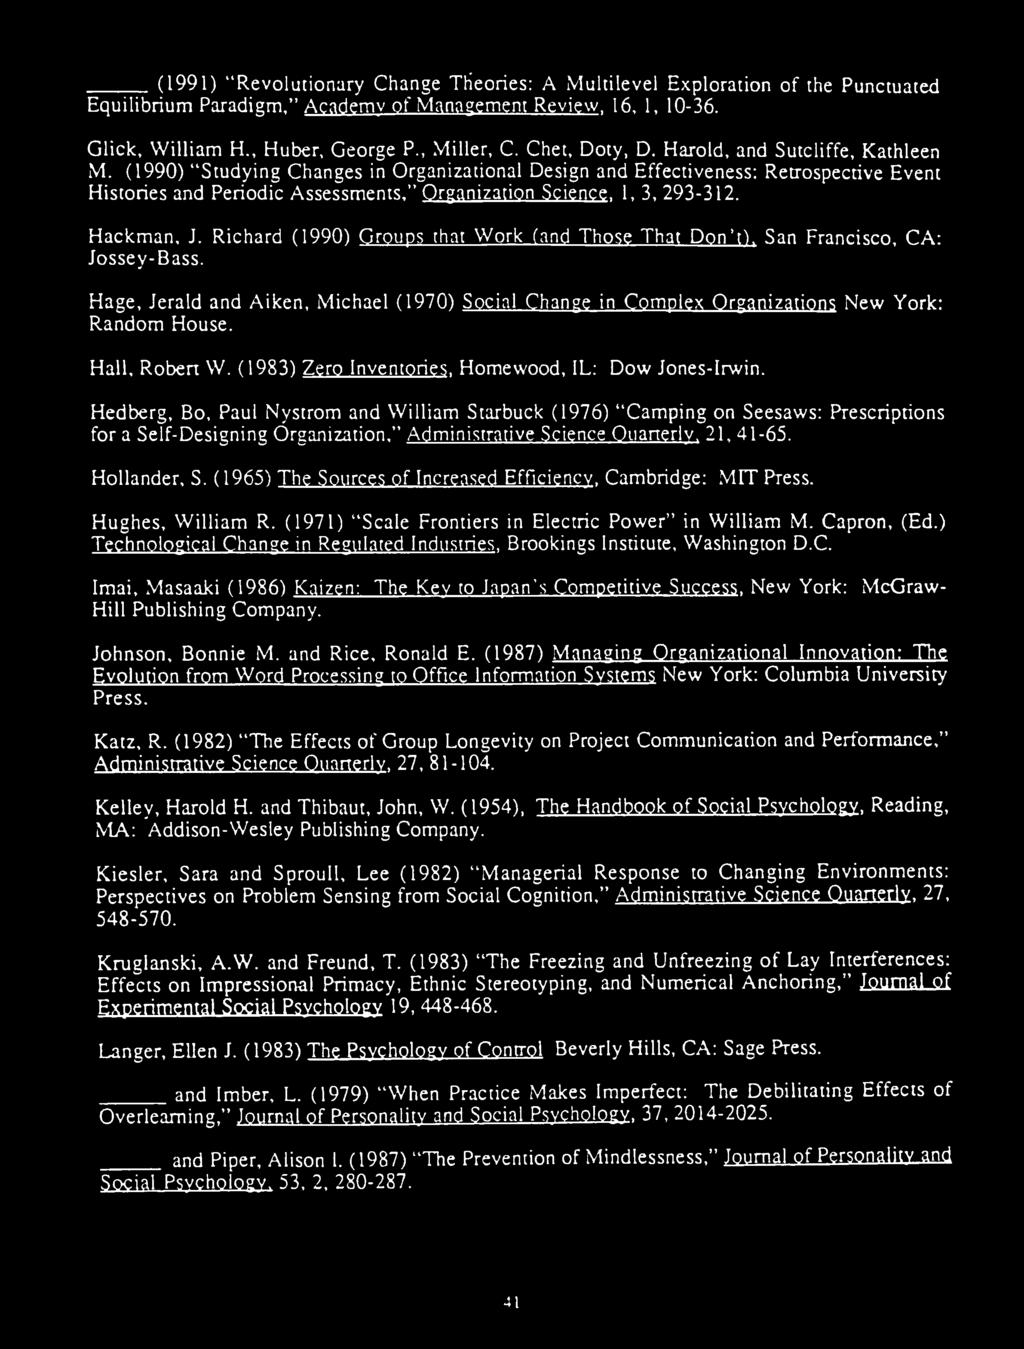 1, 3, 293-312. Hackman, J. Richard (1990) Groups that Work (and Those That Don't). San Francisco. CA: Jossey-Bass. Hage, Jerald and Aiken, Michael (1970) Social Change in Random House.